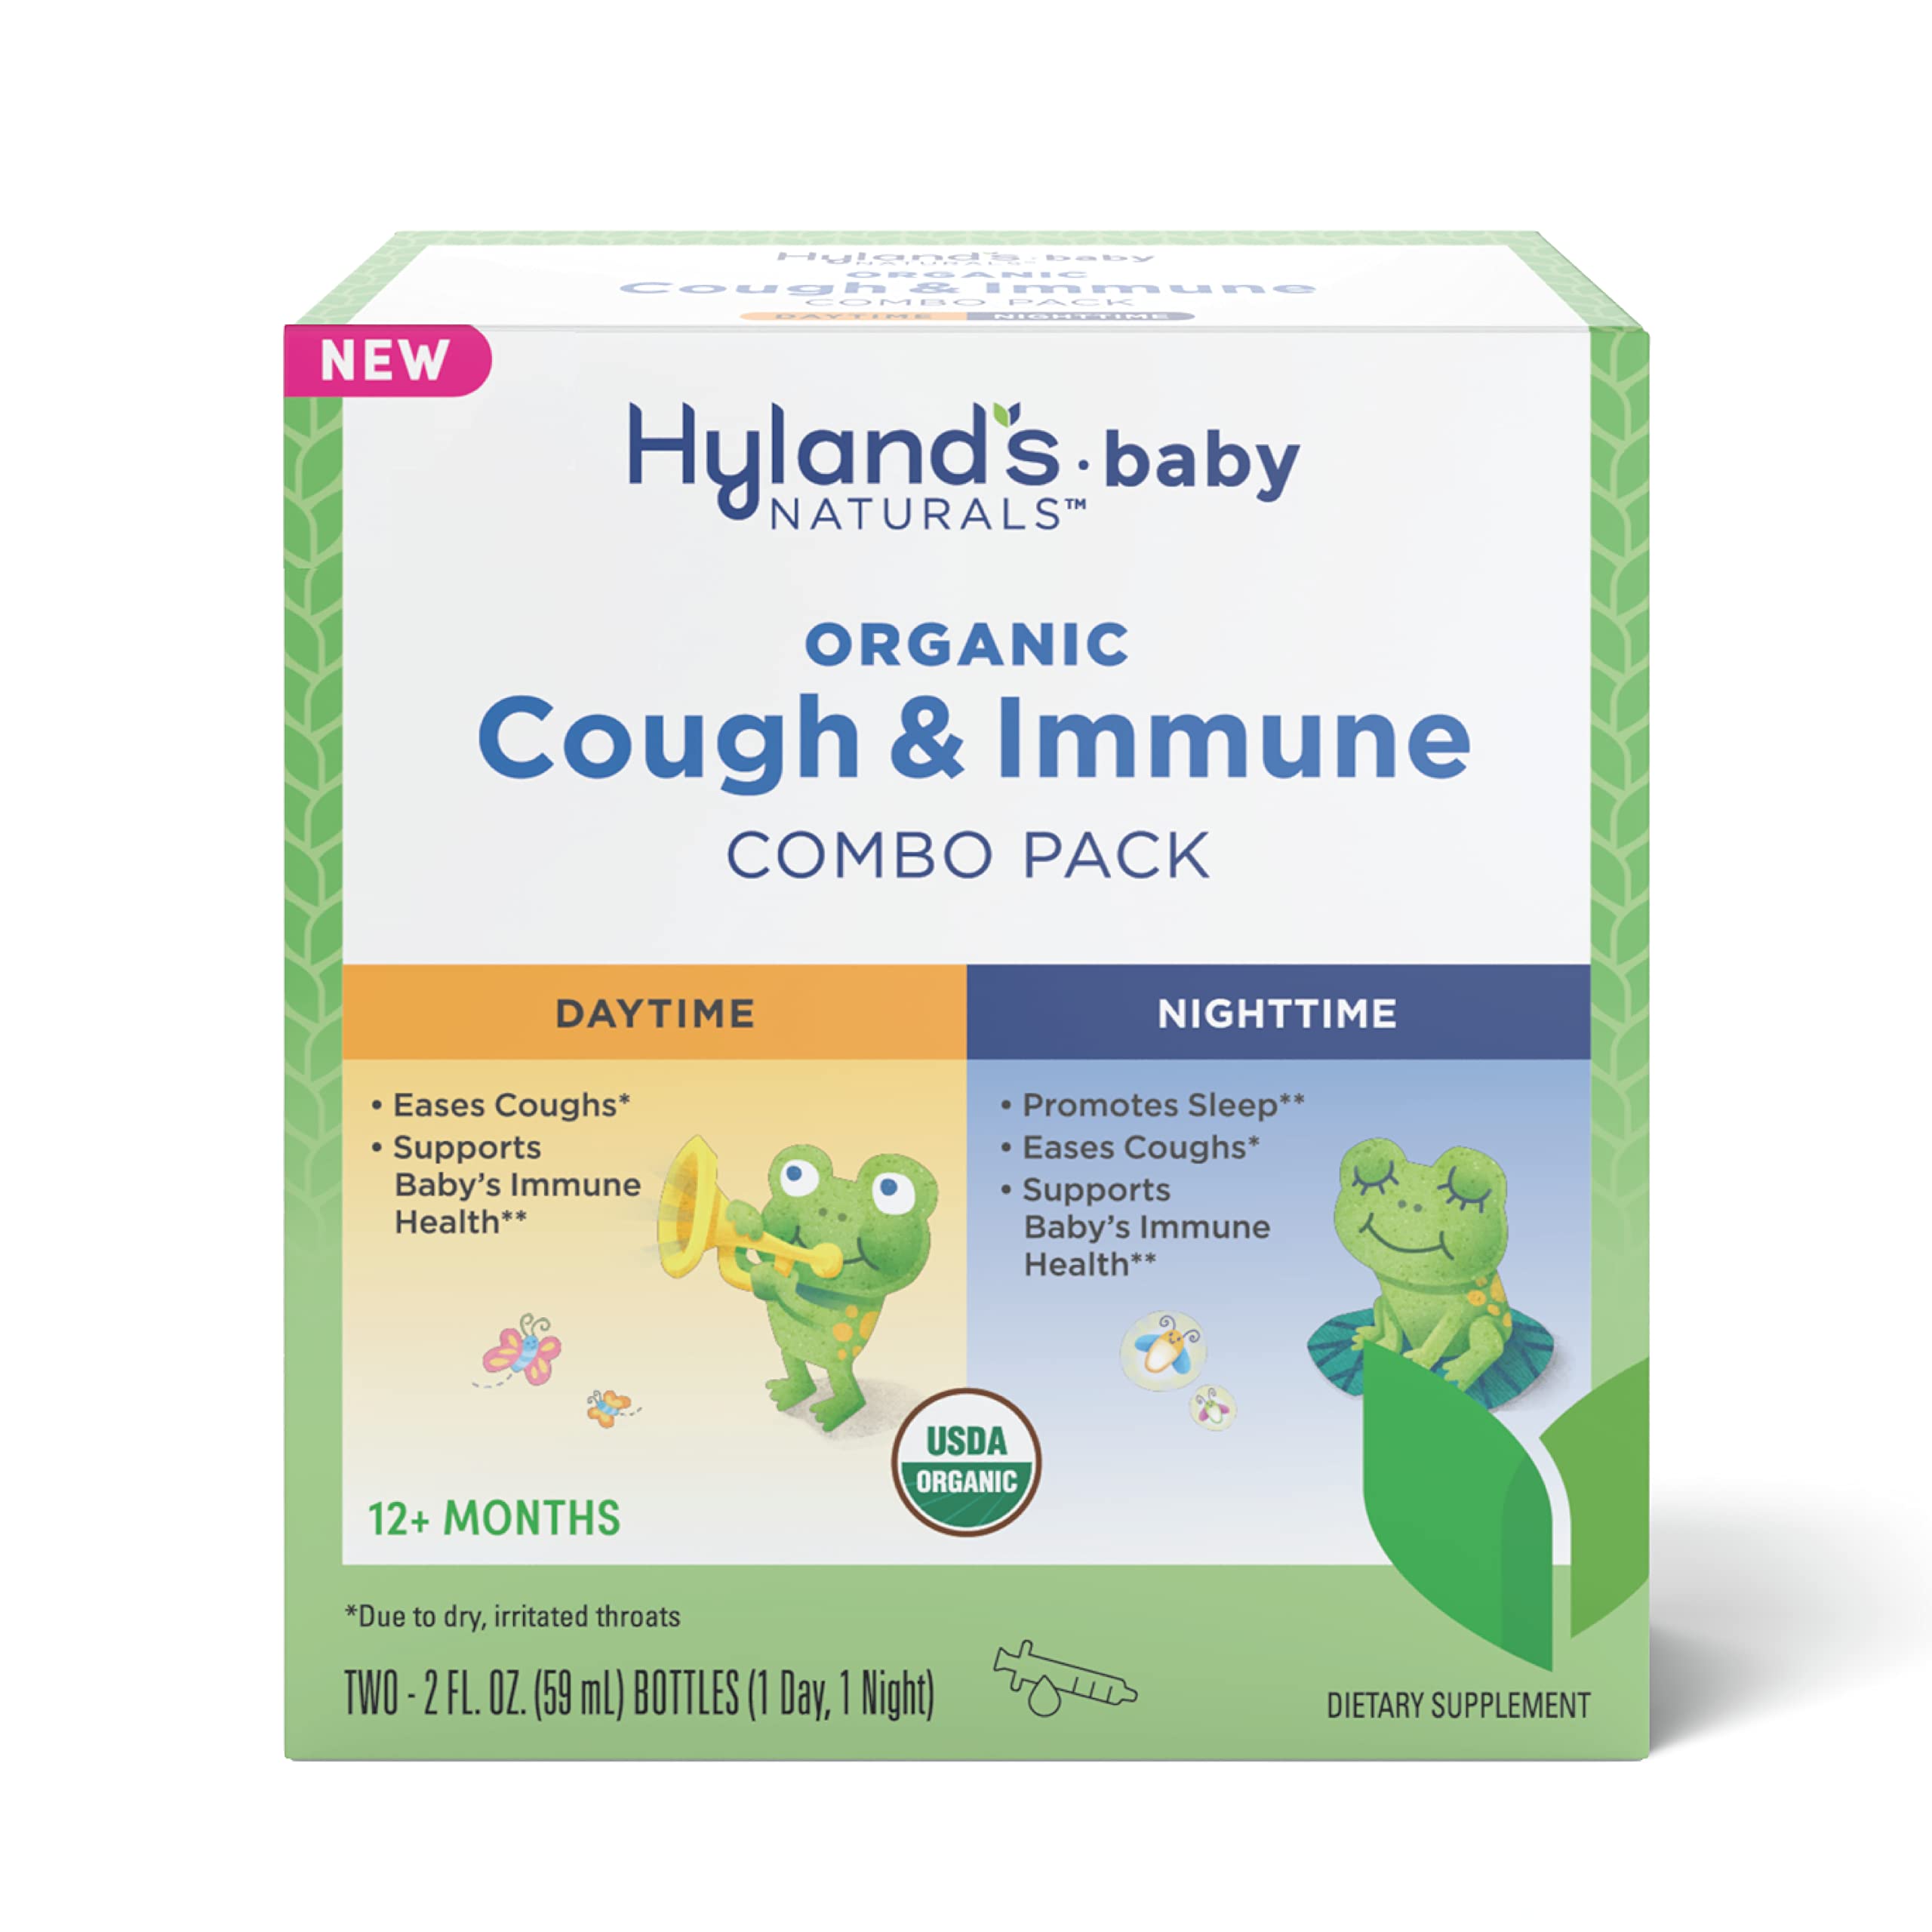 Hyland’s Naturals - Baby - Organic Cough & Immune Day & Night Combo Pack - Eases Coughs, Supports Immunity, Promotes Sleep, Two 2 Fl Oz. Bottles (4 fl oz)